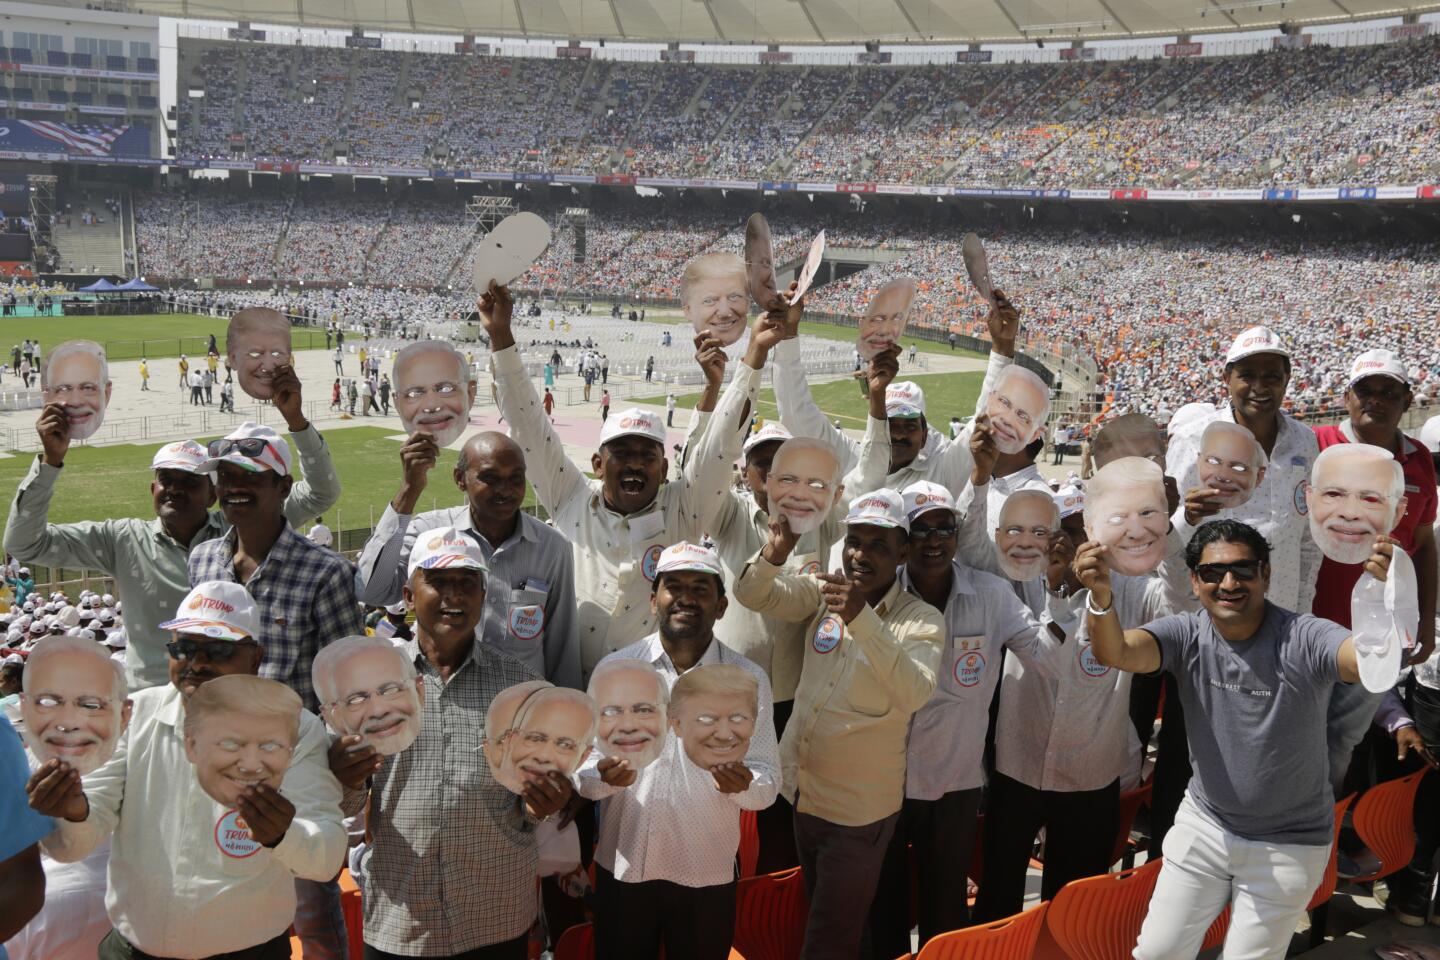 Masks of Trump and Modi are displayed by rally attendees before the start of the event.